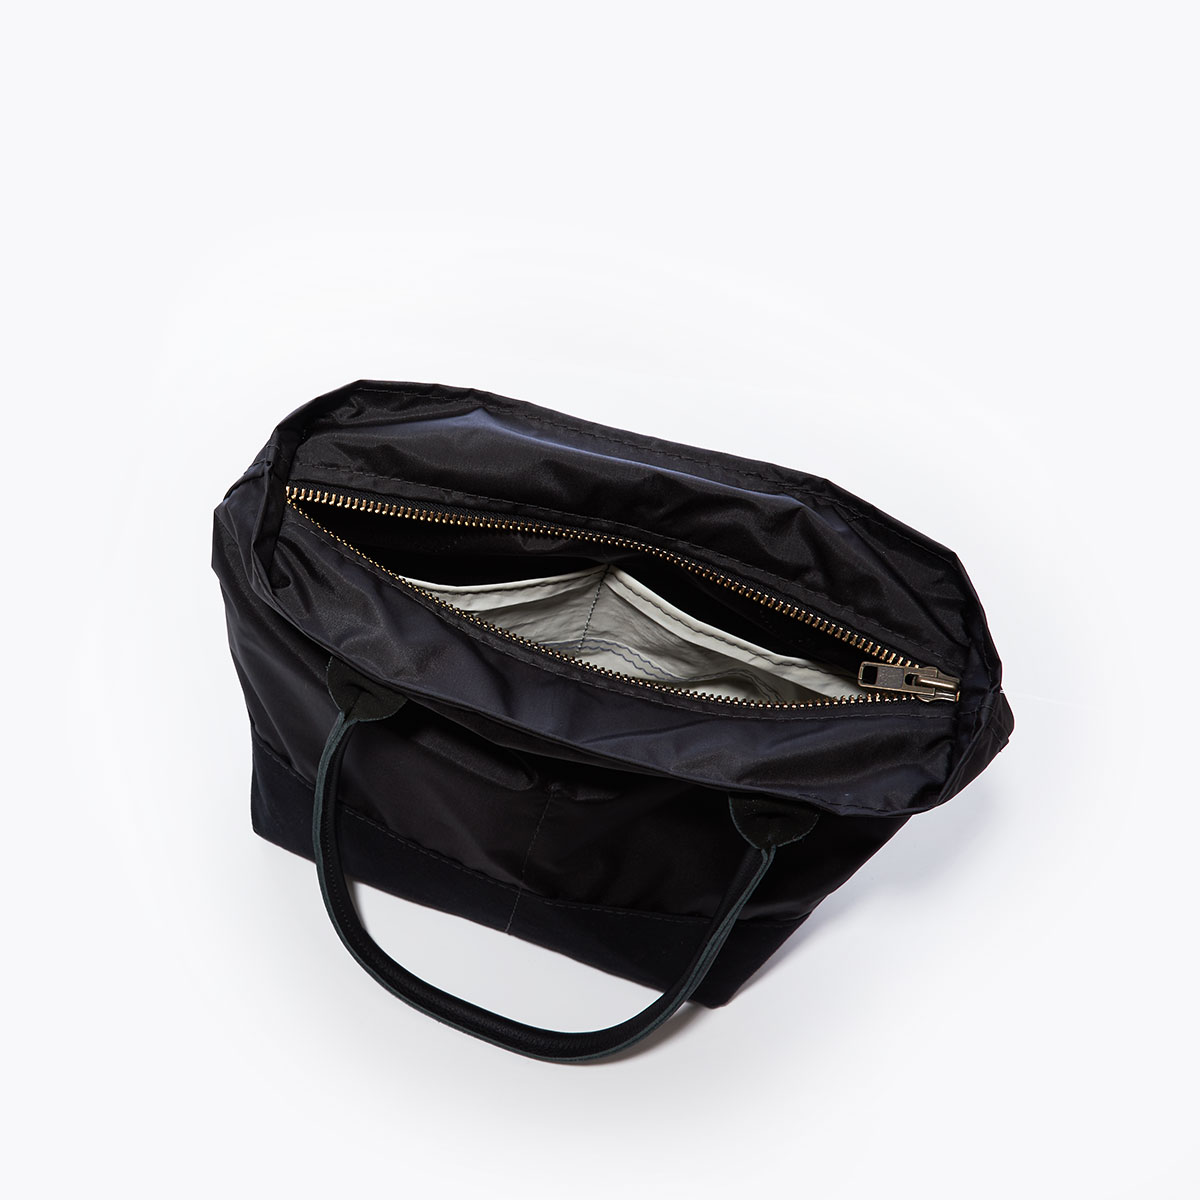 inside view showing interior side pockets of a black recycled sail cloth handbag with a black canvas bottom and leather handles